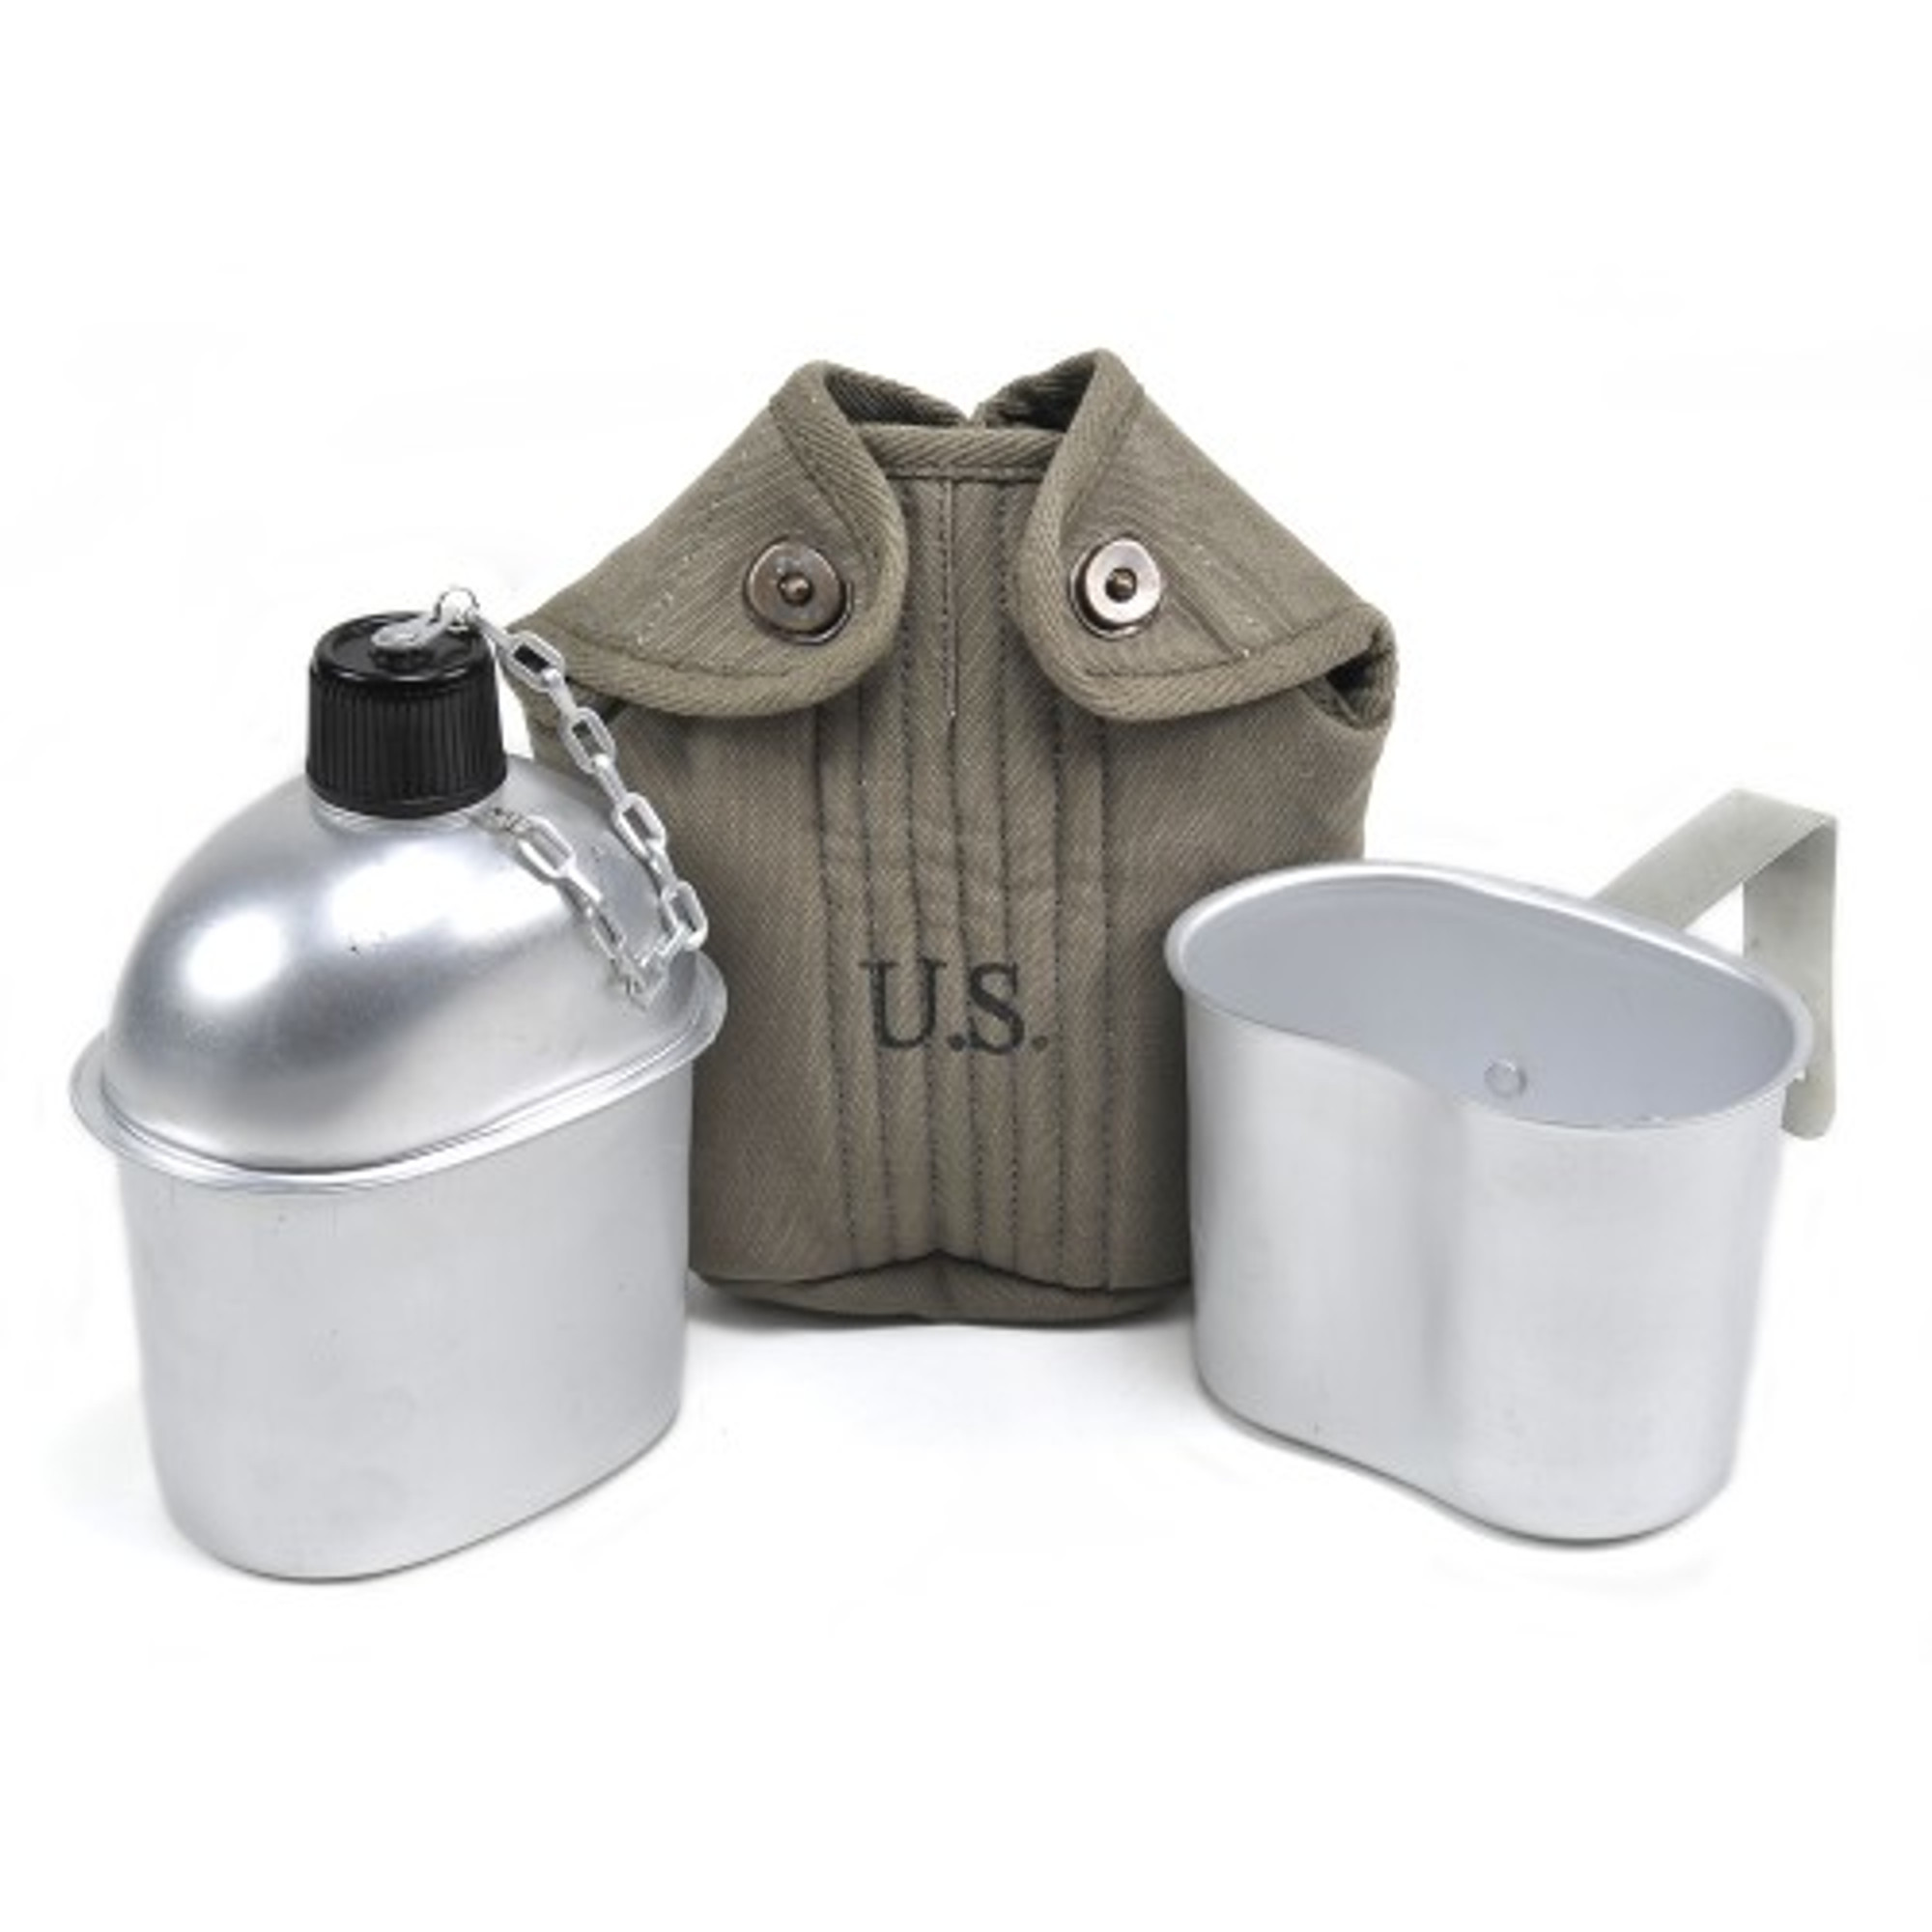 U.S. WW2 Canteen, Canteen Cover Dated 1944 & Canteen Cup - Dark OD